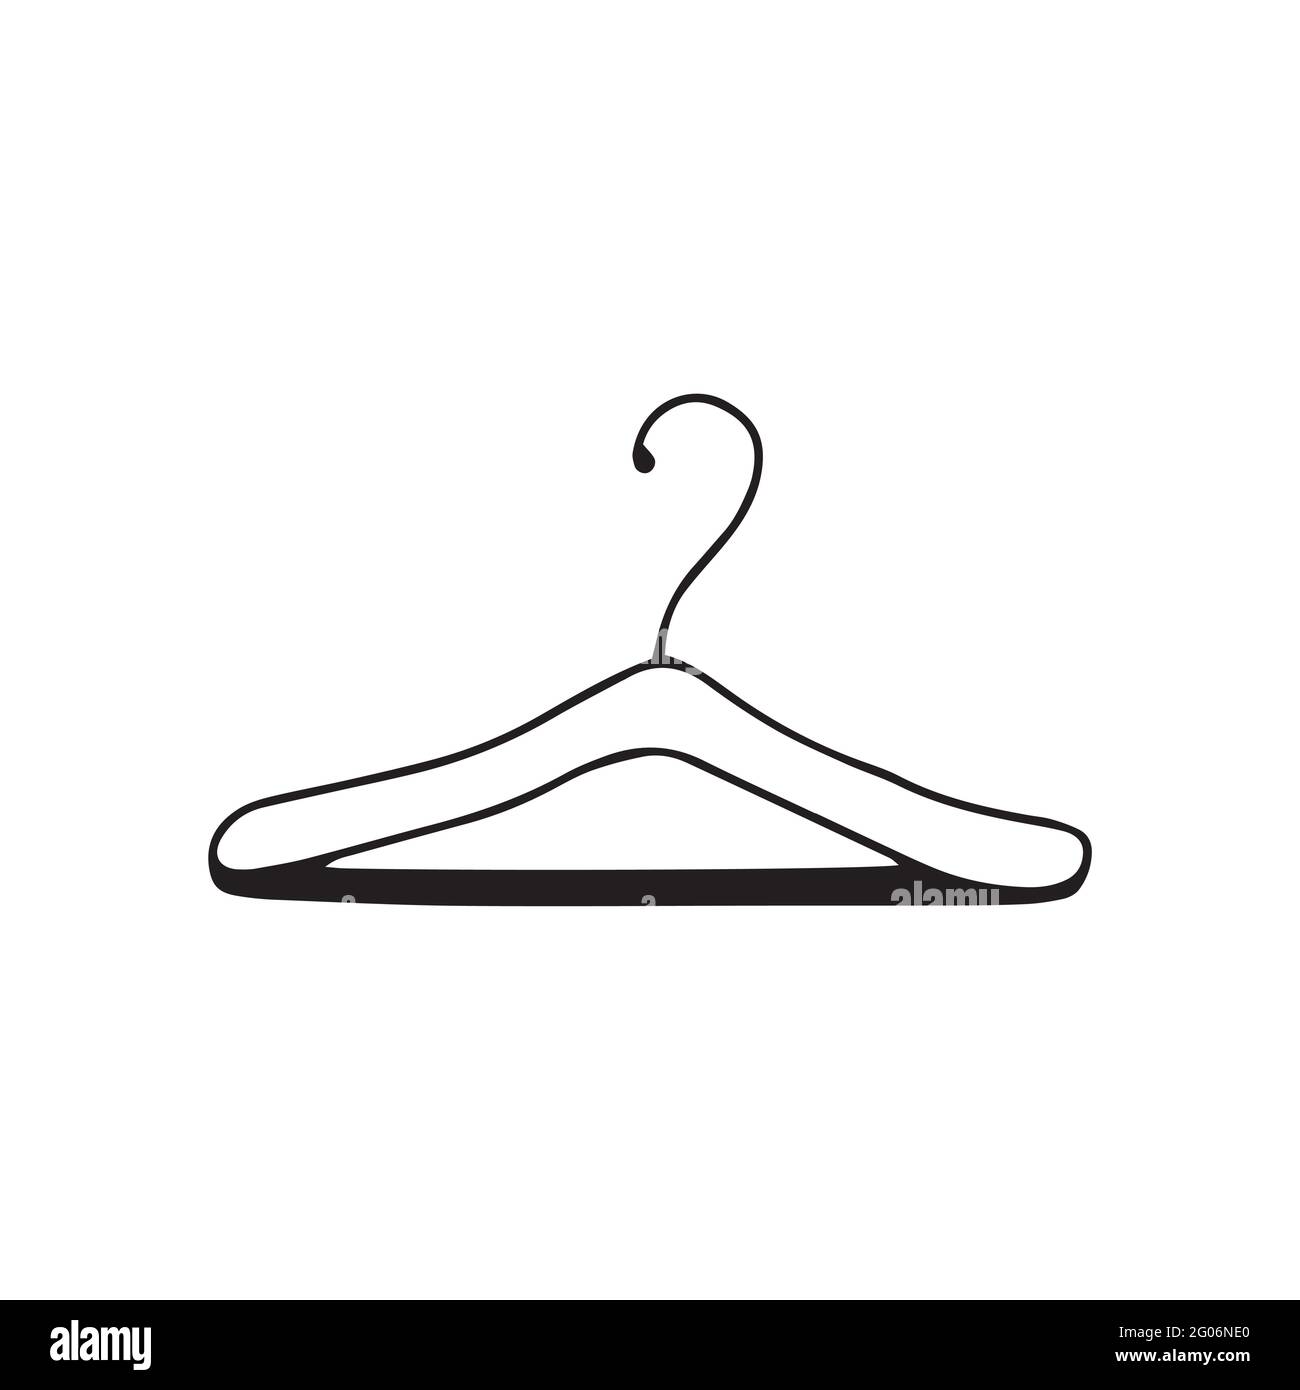 Clothes rack. Black and white vector illustration in doodle style isolated single. Tool for organizing storage in the closet. Hanger empty Stock Vector